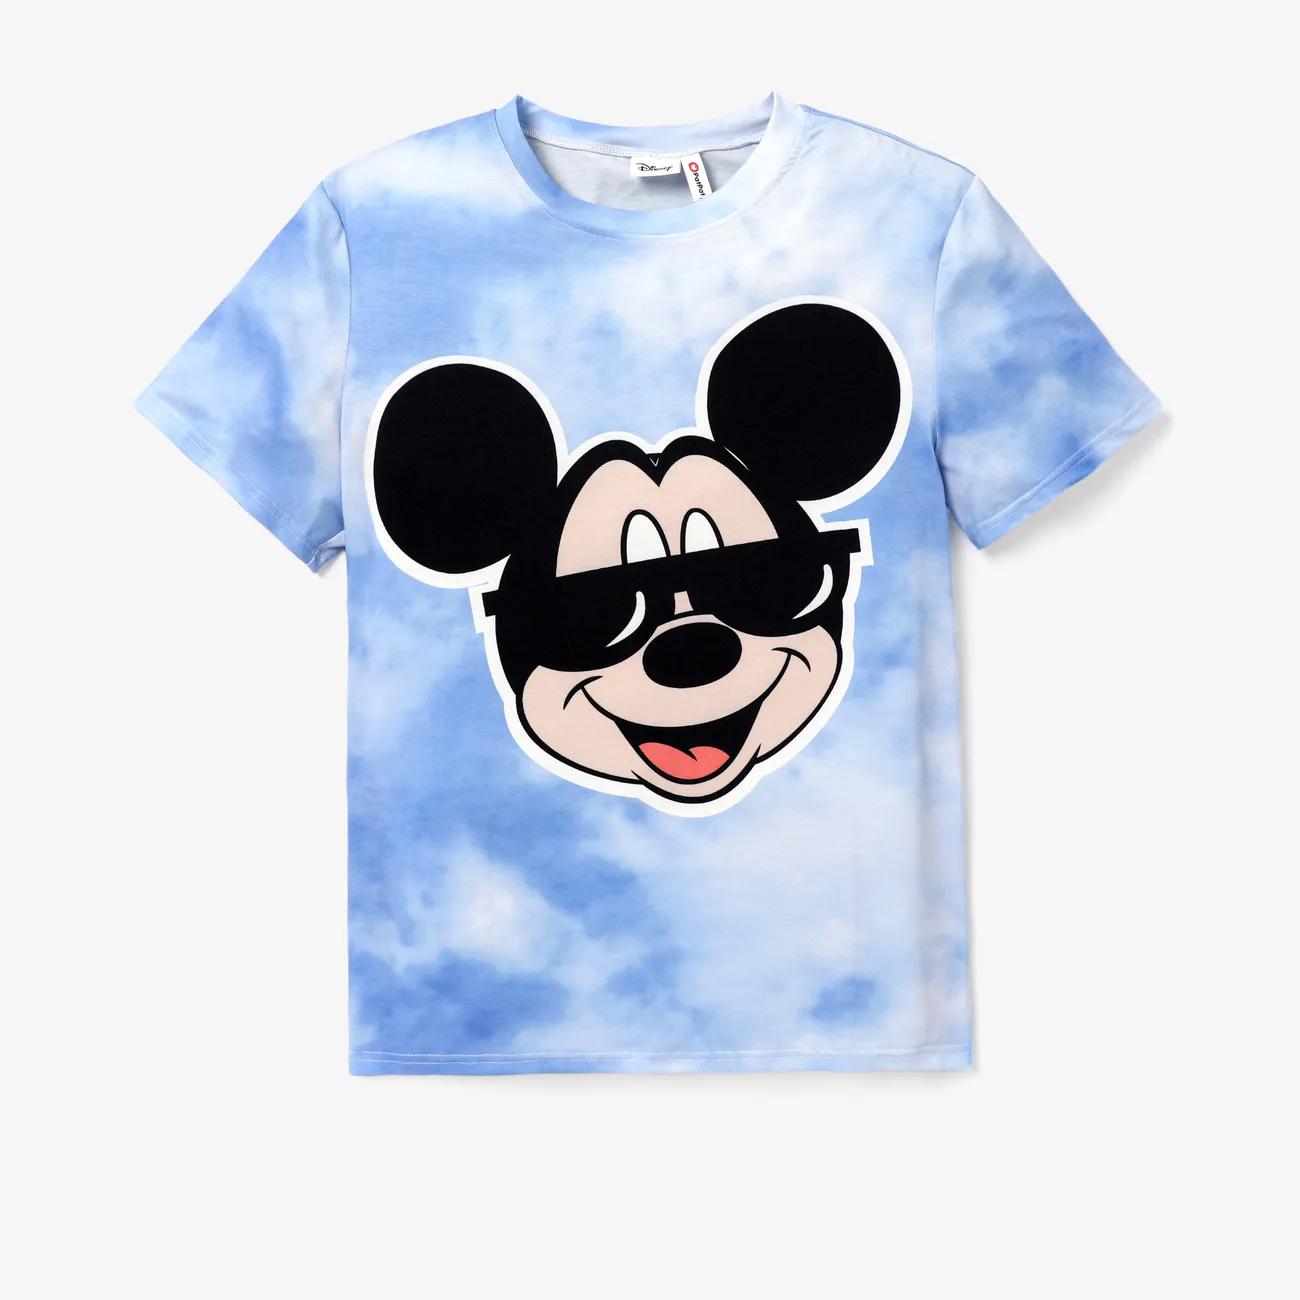 Disney Mickey and Friends Family Matching Character Print Short-sleeve T-shirt Blue big image 1